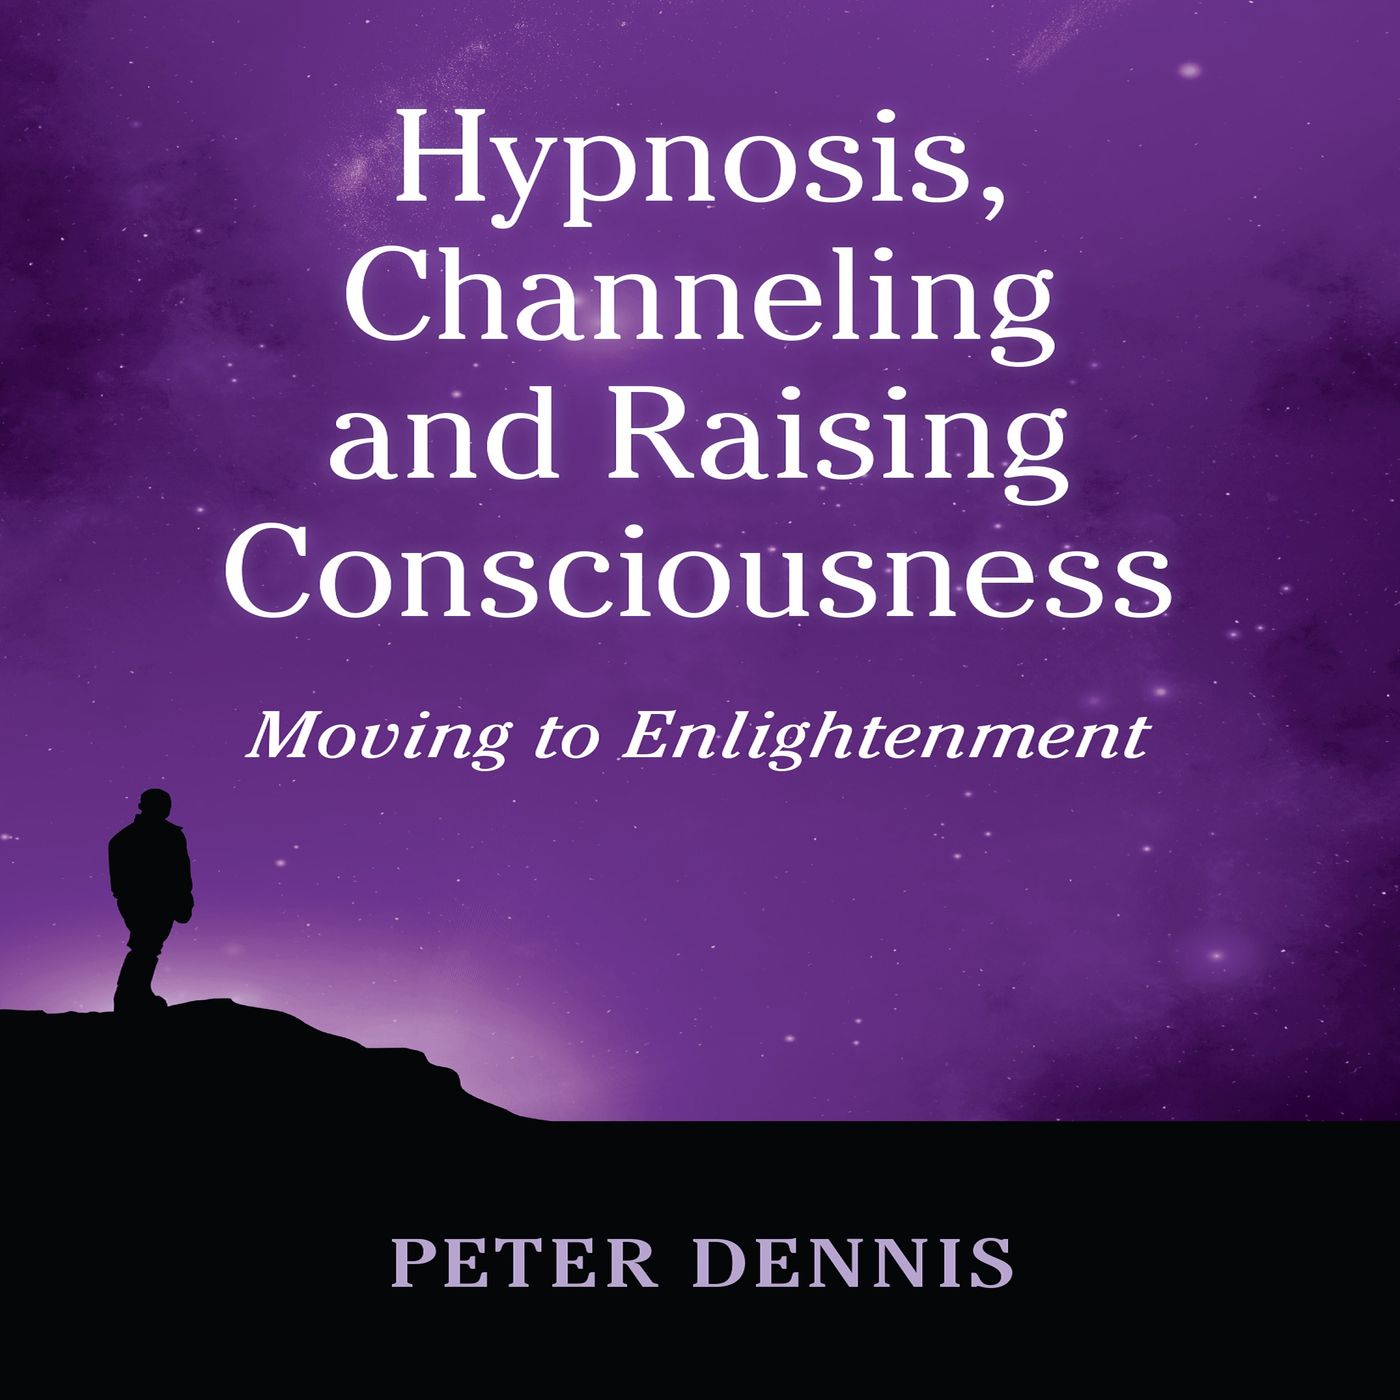 3. Peter Dennis, Hypnosis, Channeling and Raising Consciousness, Introduction